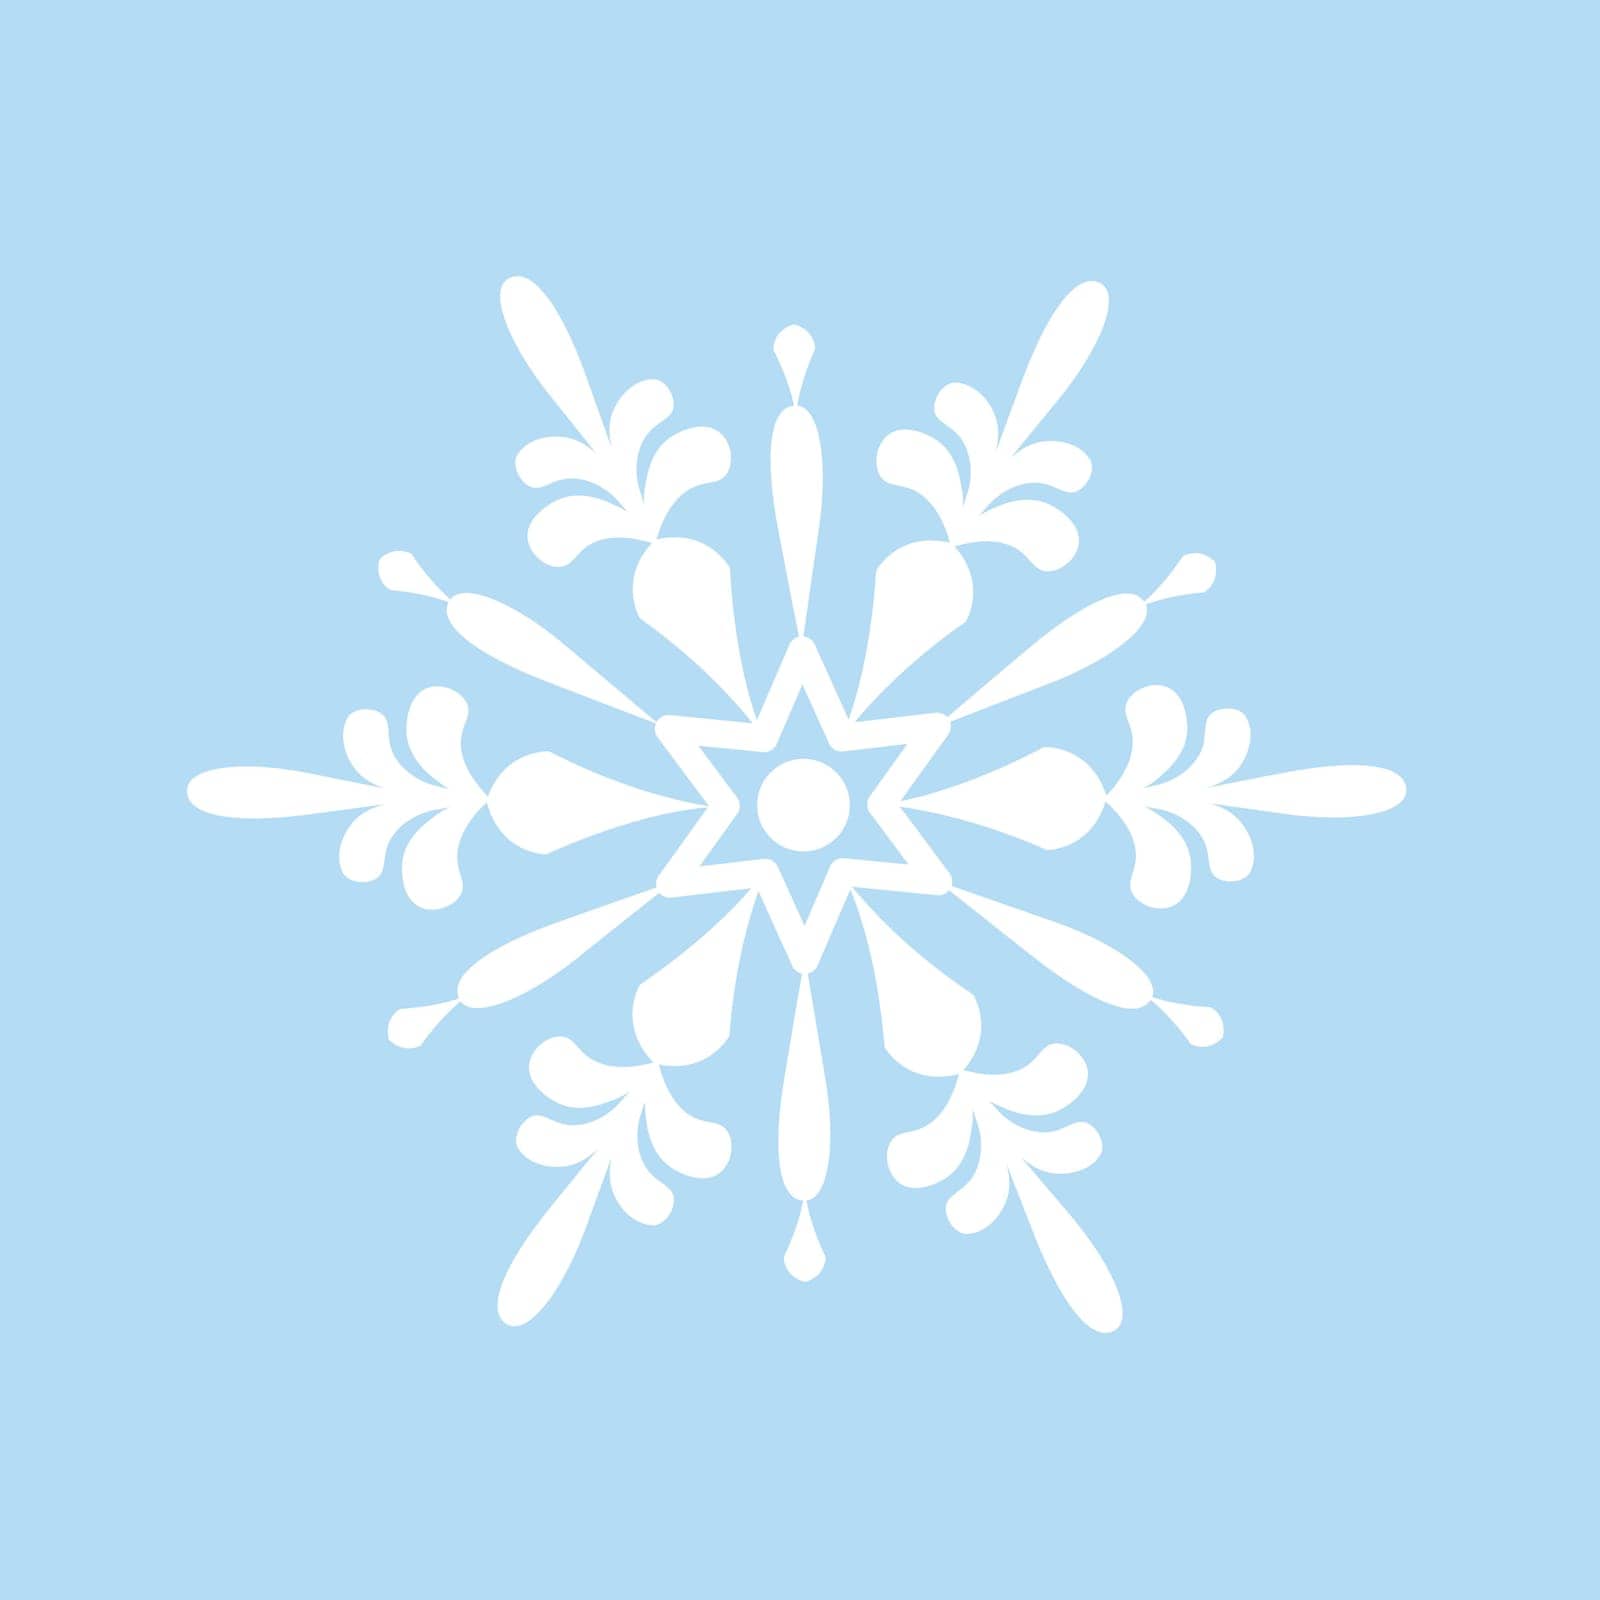 Snowflake. Beautiful snowflake in cartoon style. A white snowflake on a blue background. Winter Christmas illustration. Vector by NastyaN